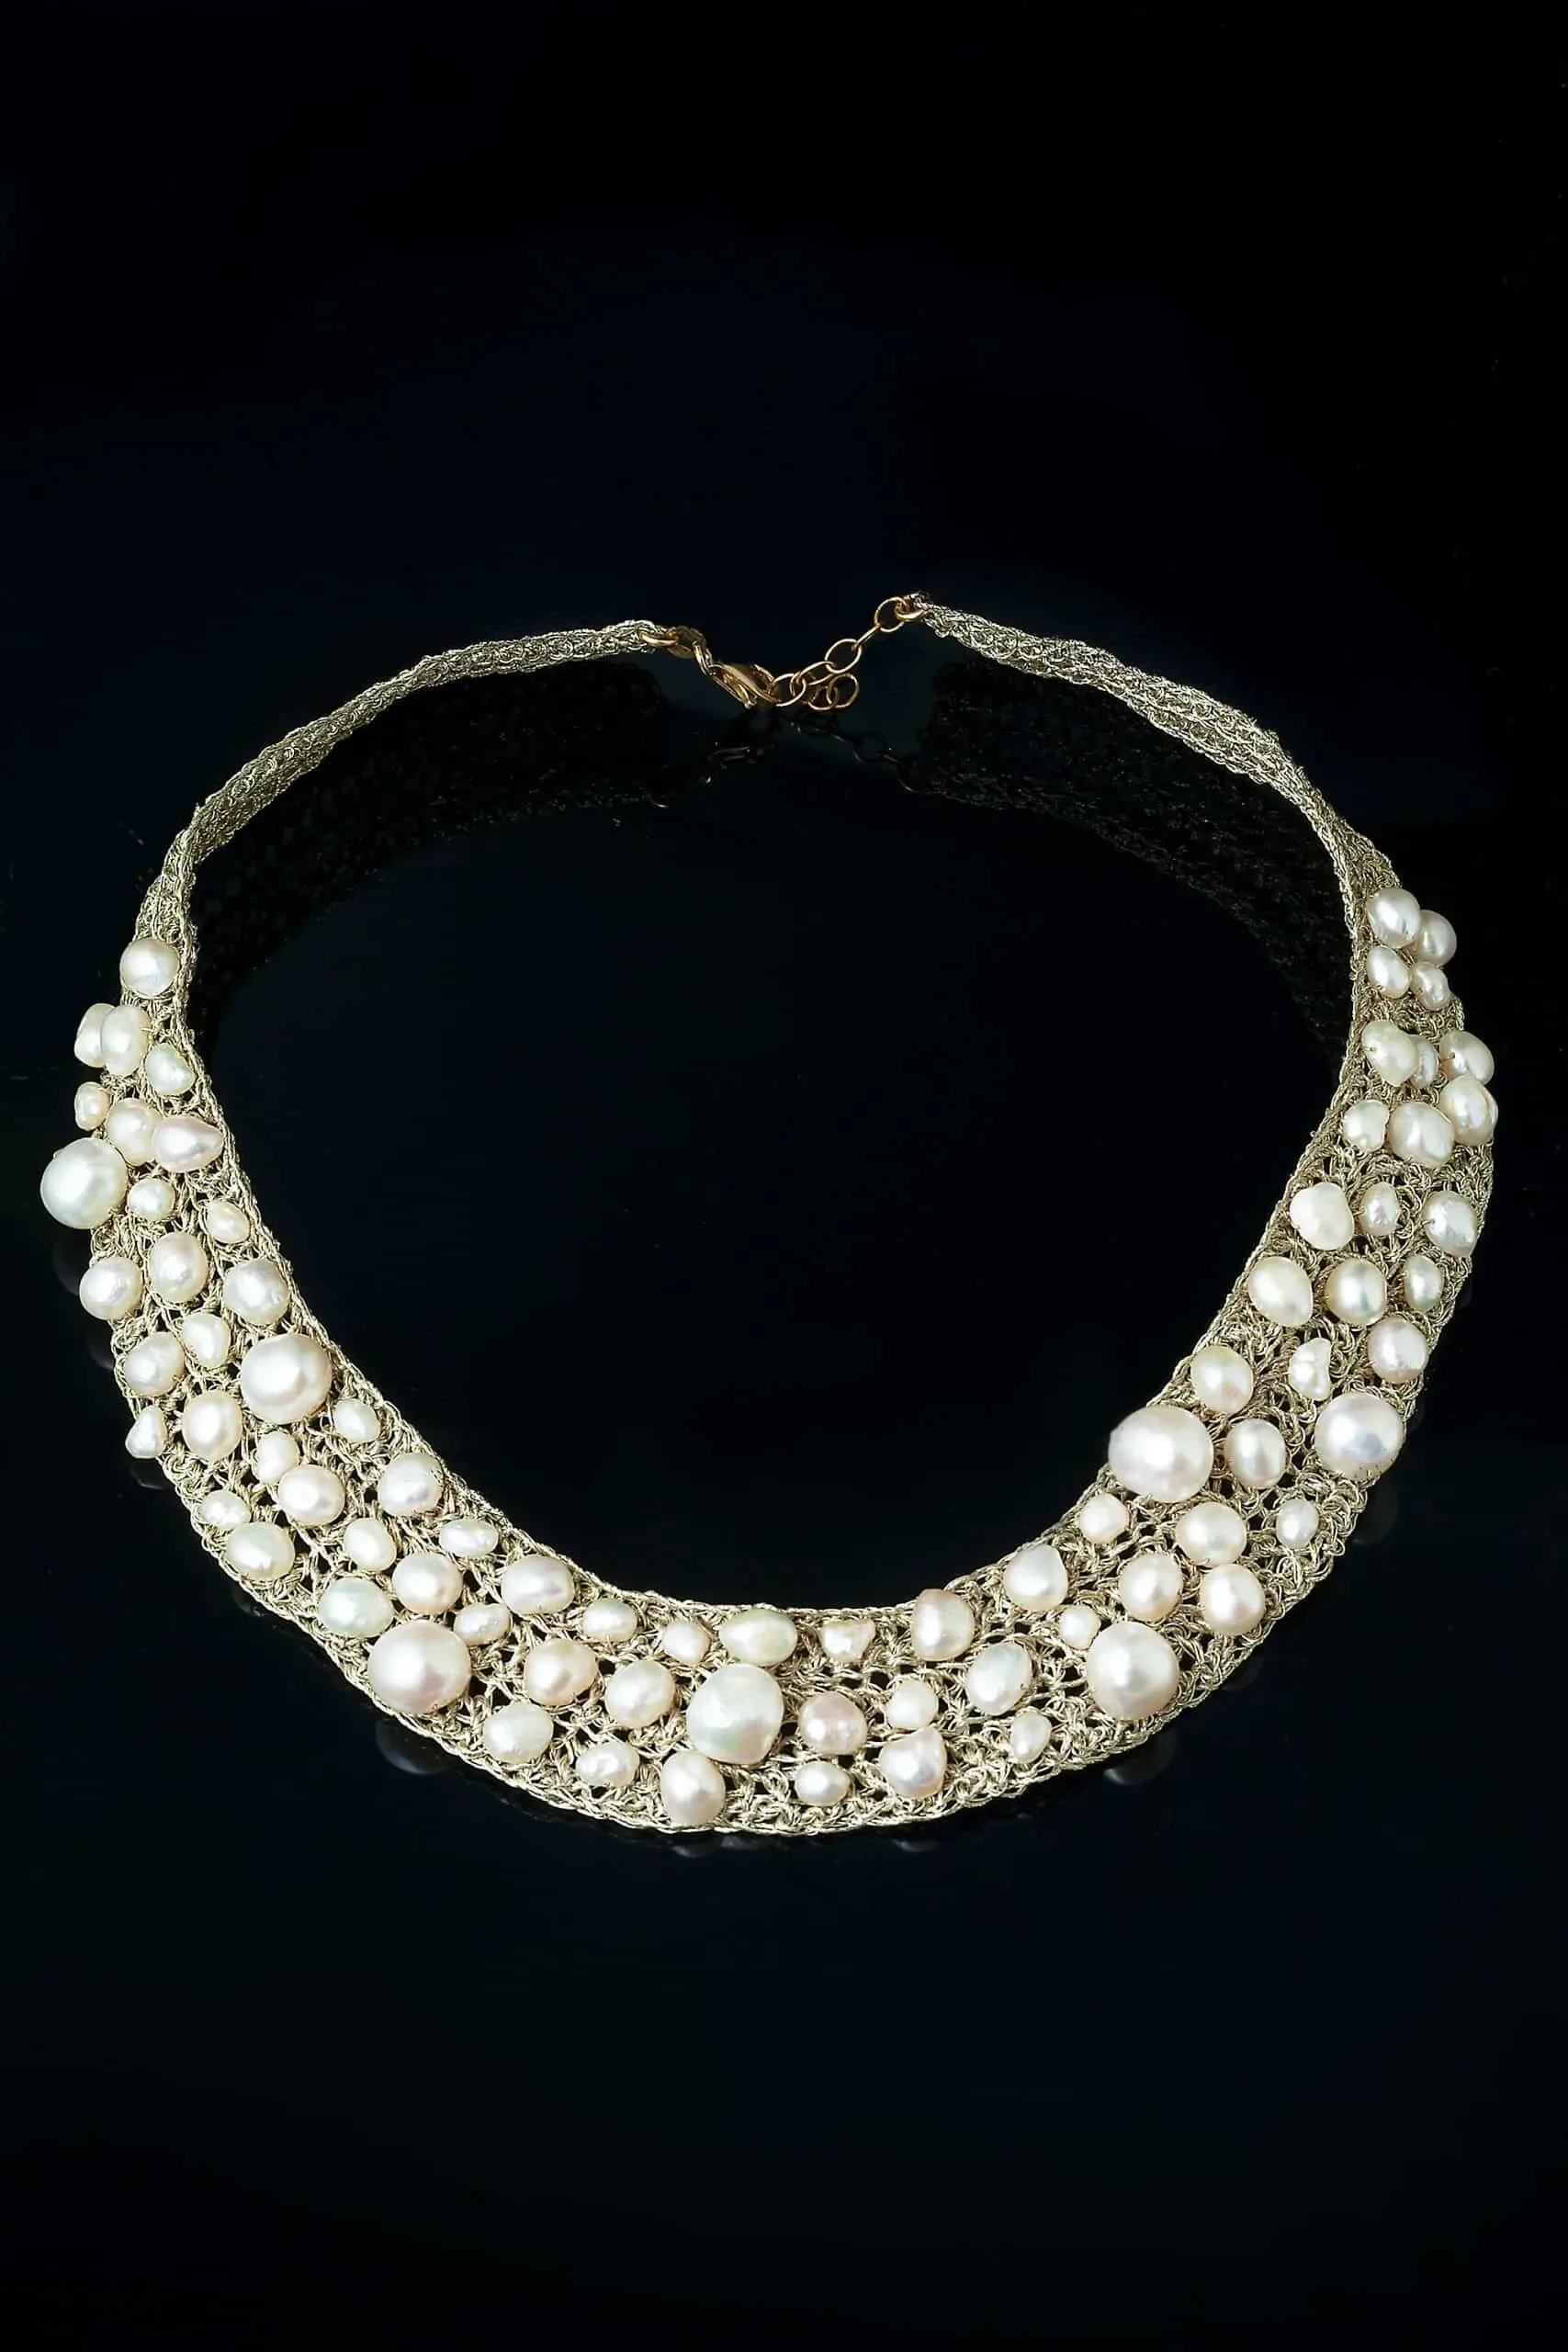 Handmade Jewellery | Crochet knit silver statement necklace with and pearls gallery 2